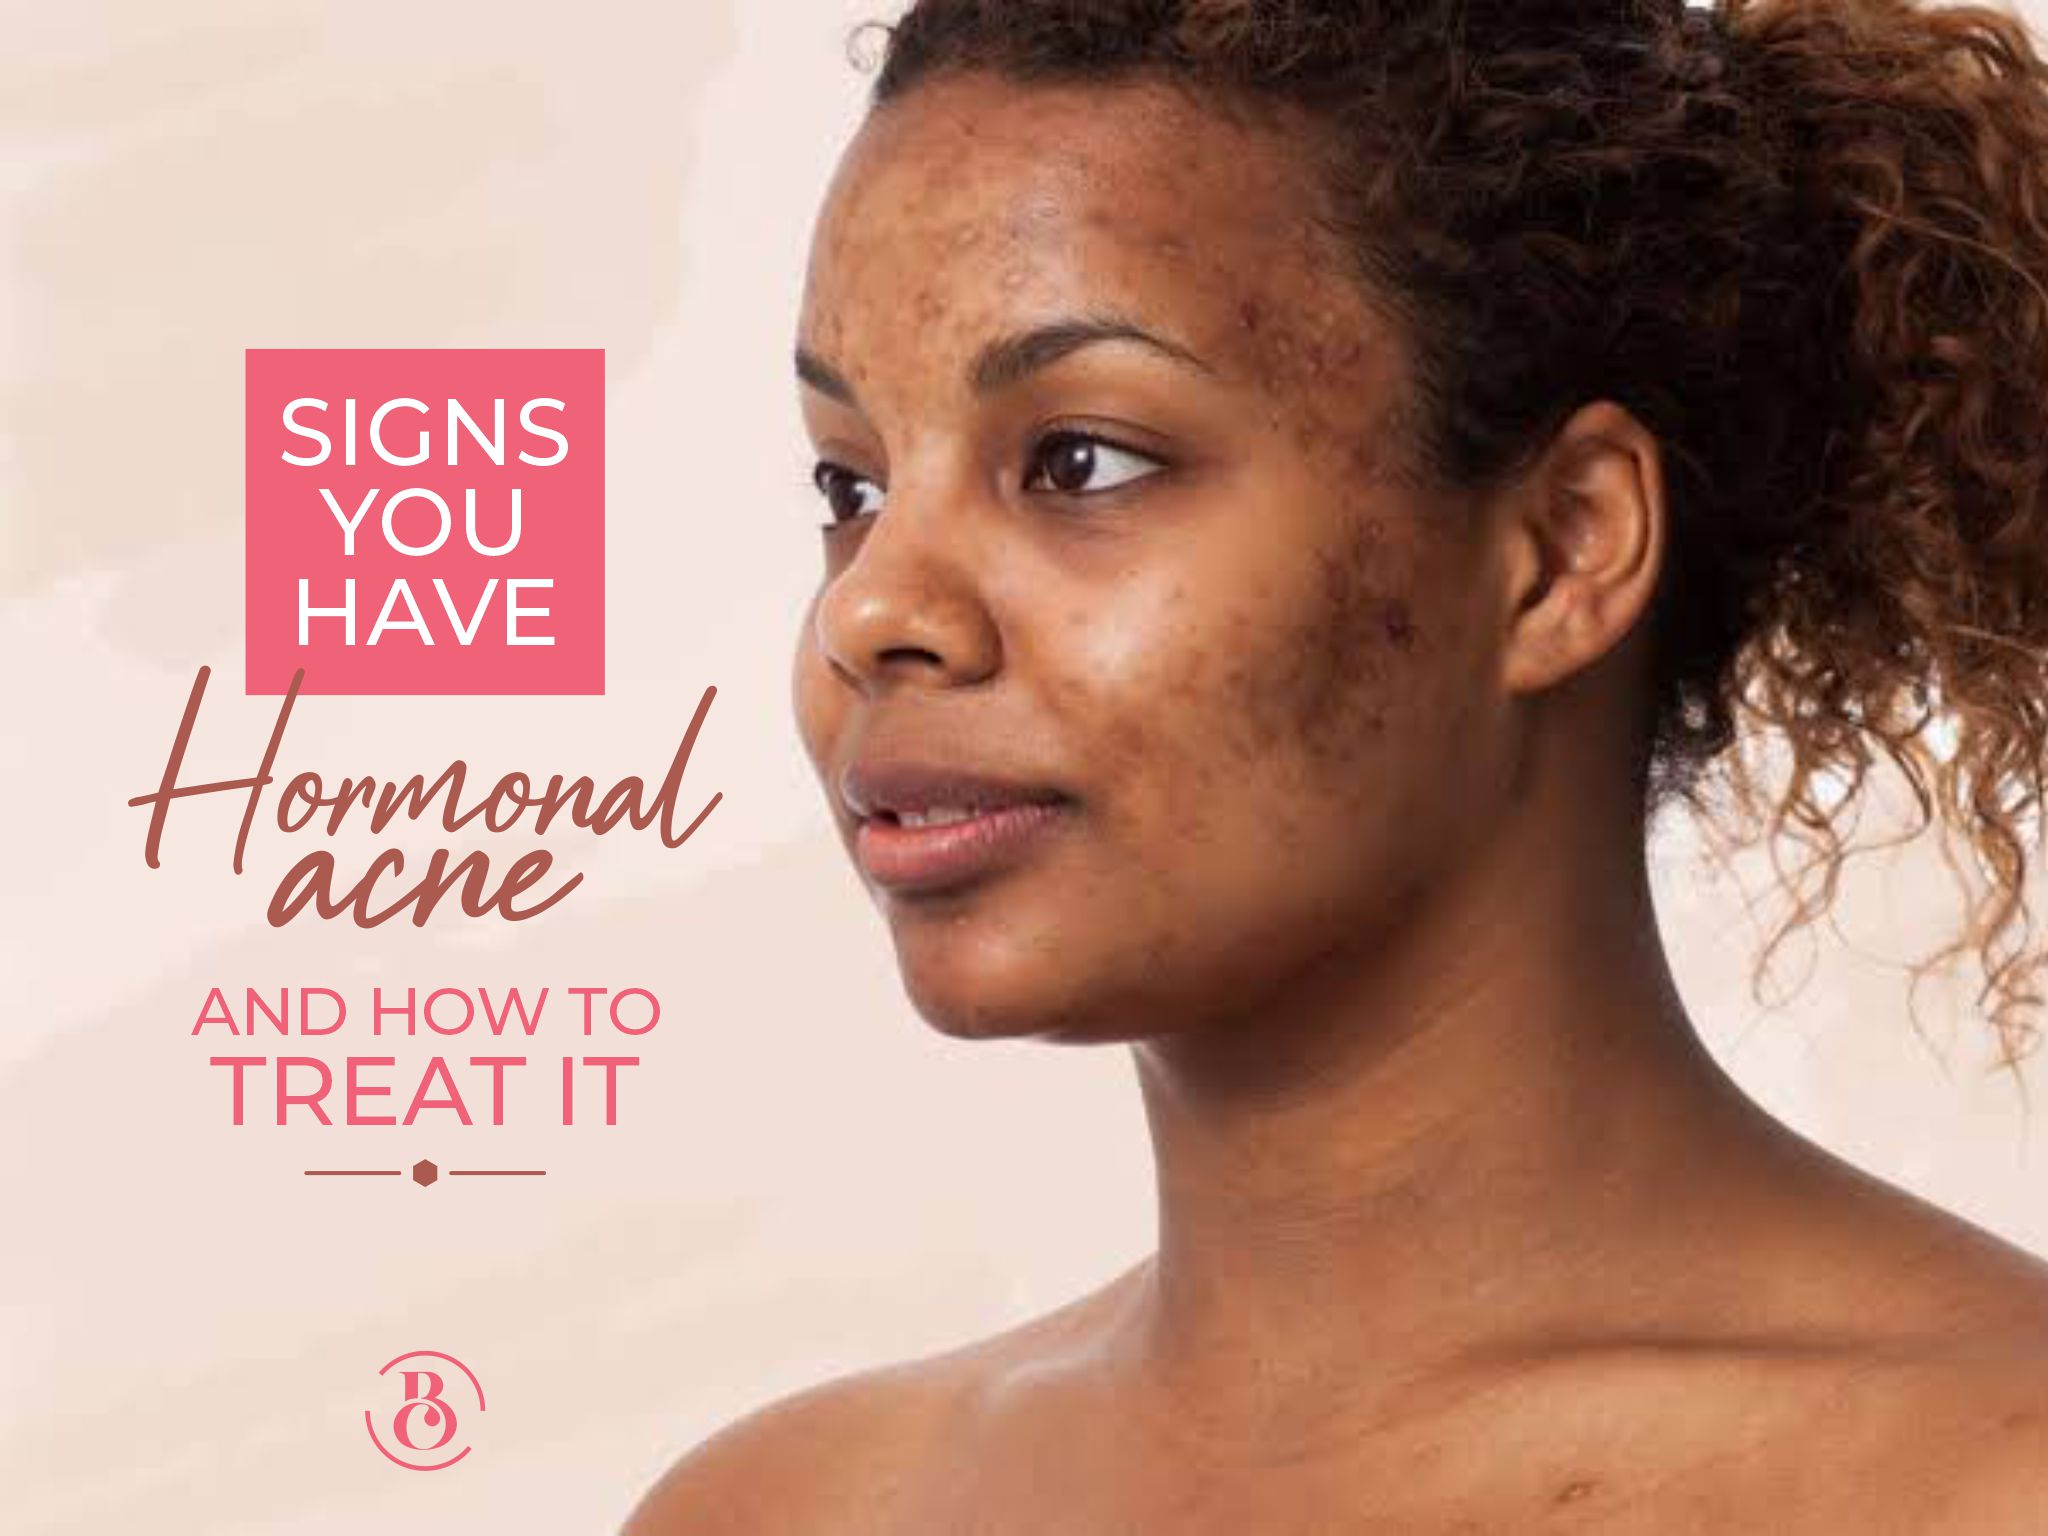 4 Signs You Have Hormonal Acne and How to Treat It